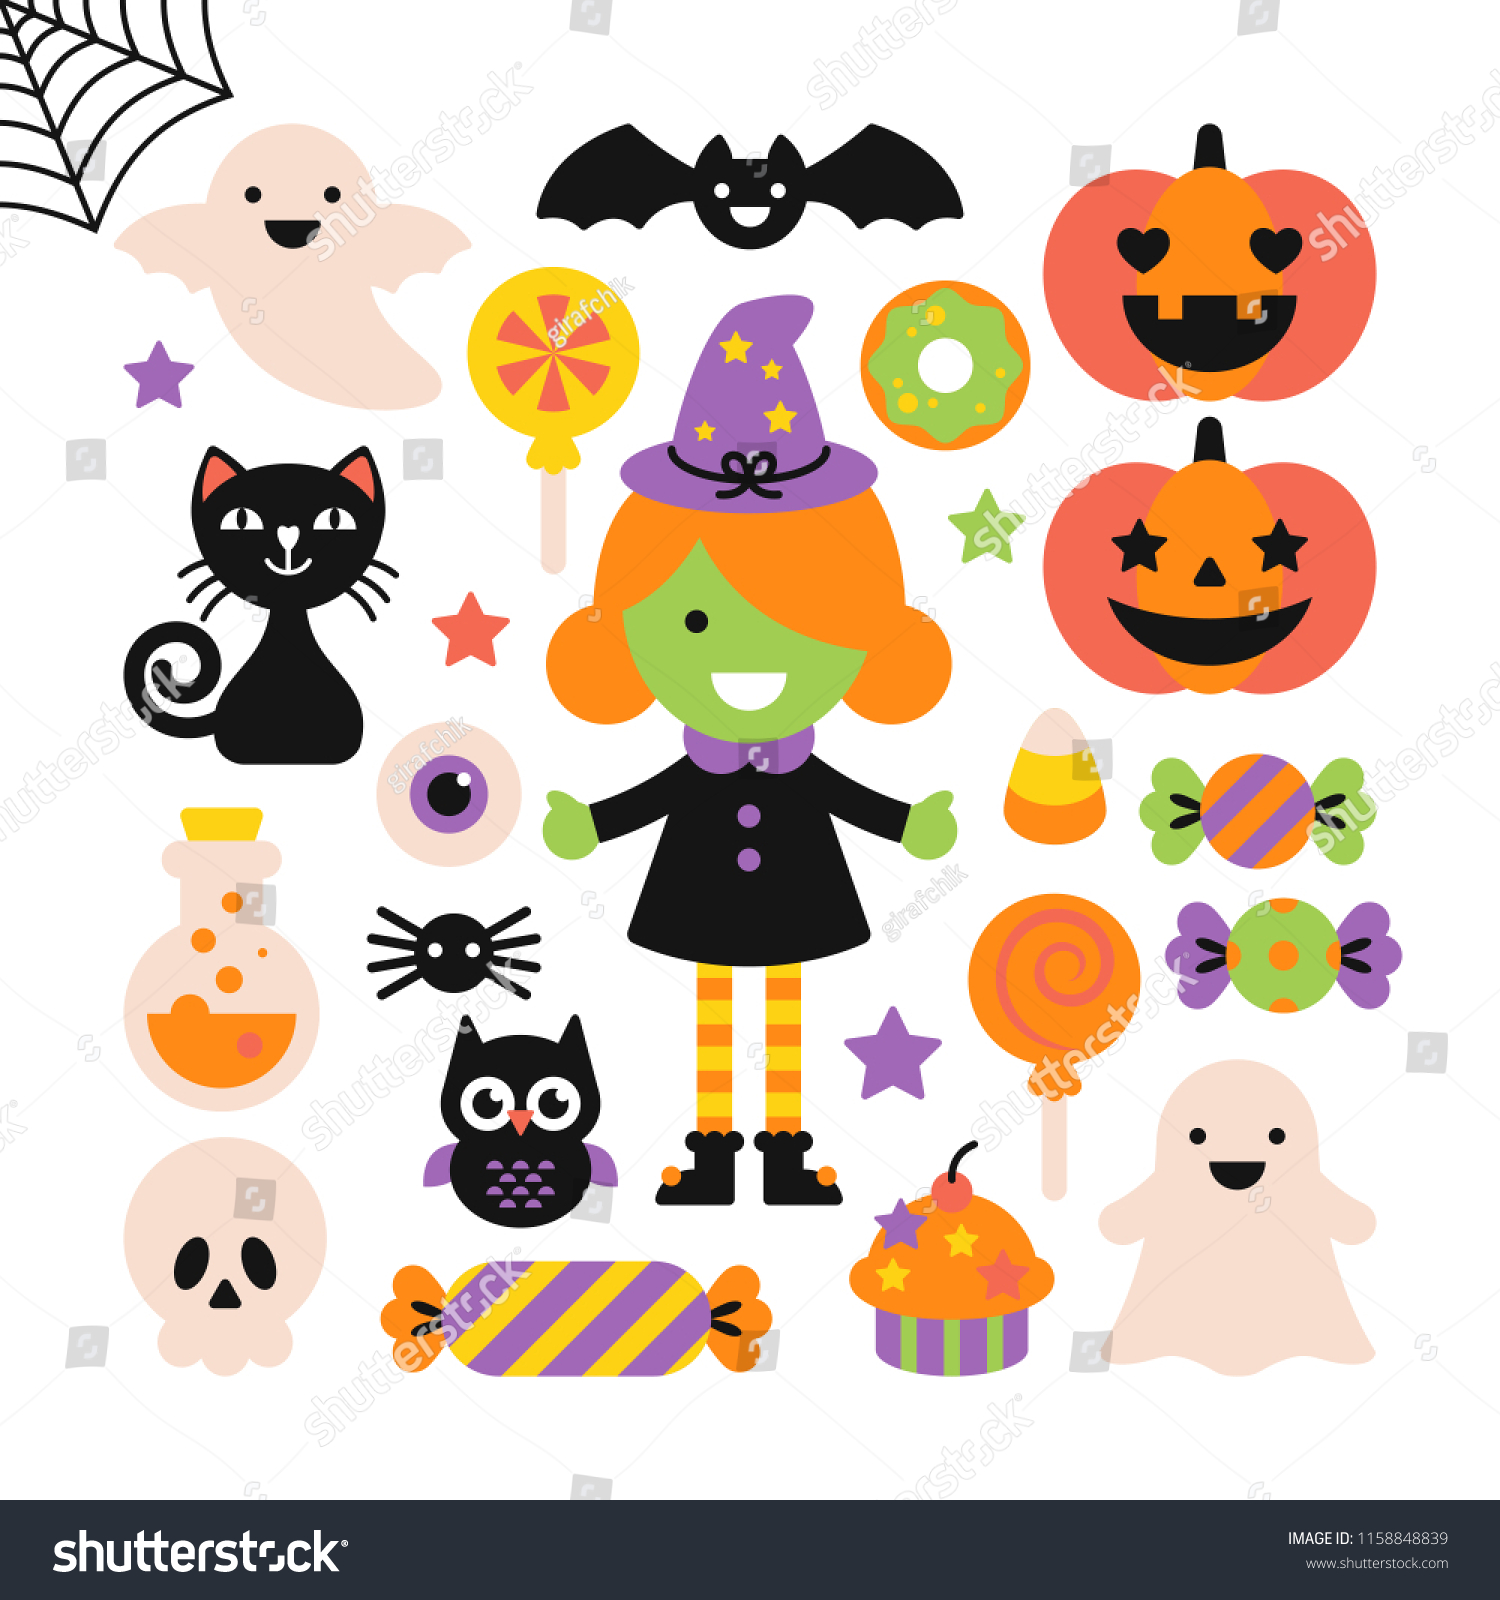 Halloween Holiday Elements Set Graphic Web Stock Vector (Royalty Free ...